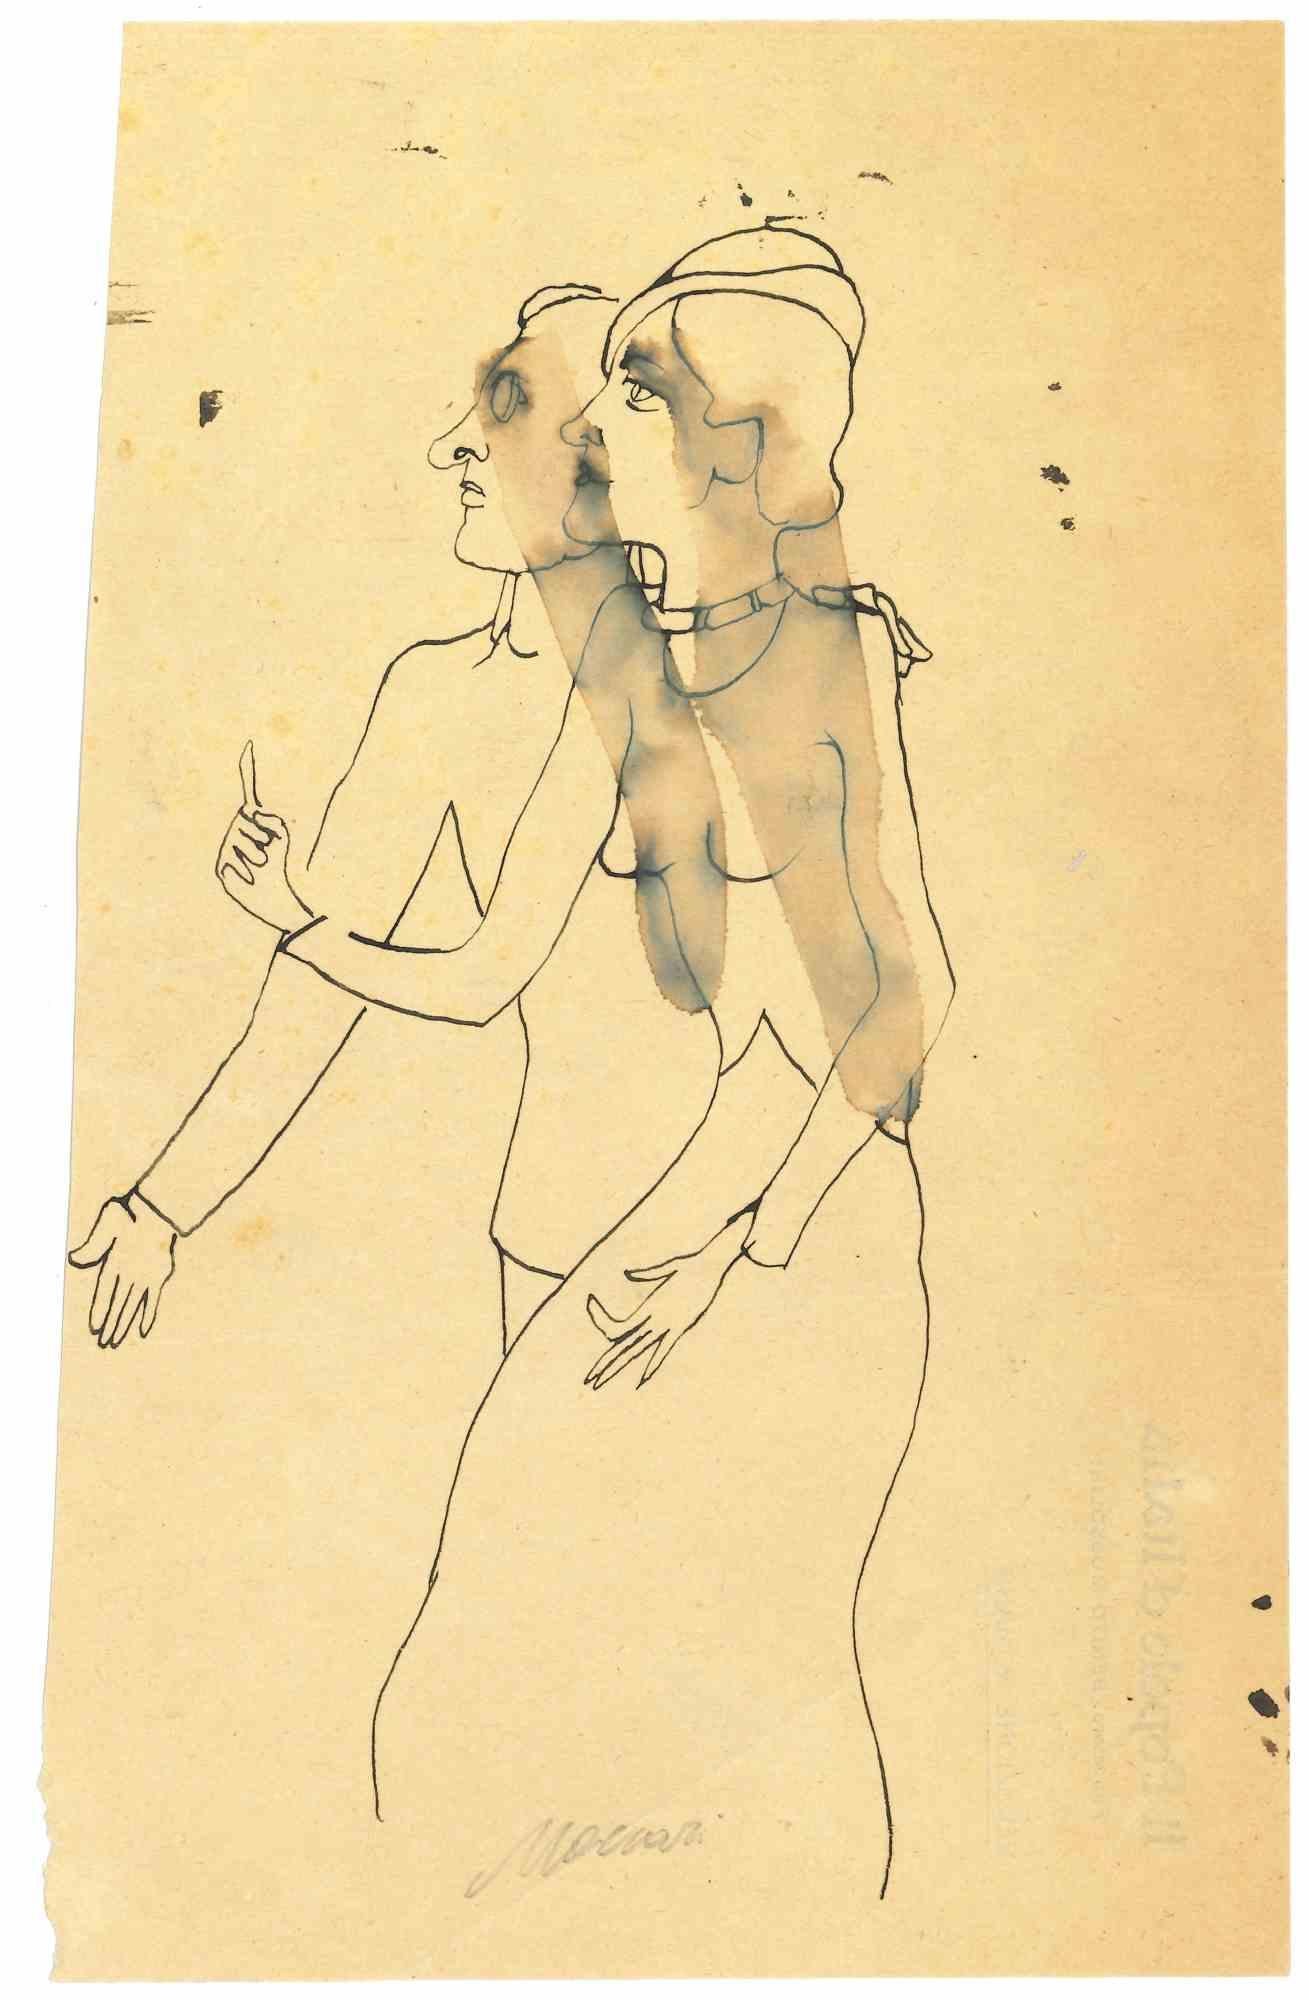 1950s couple drawing